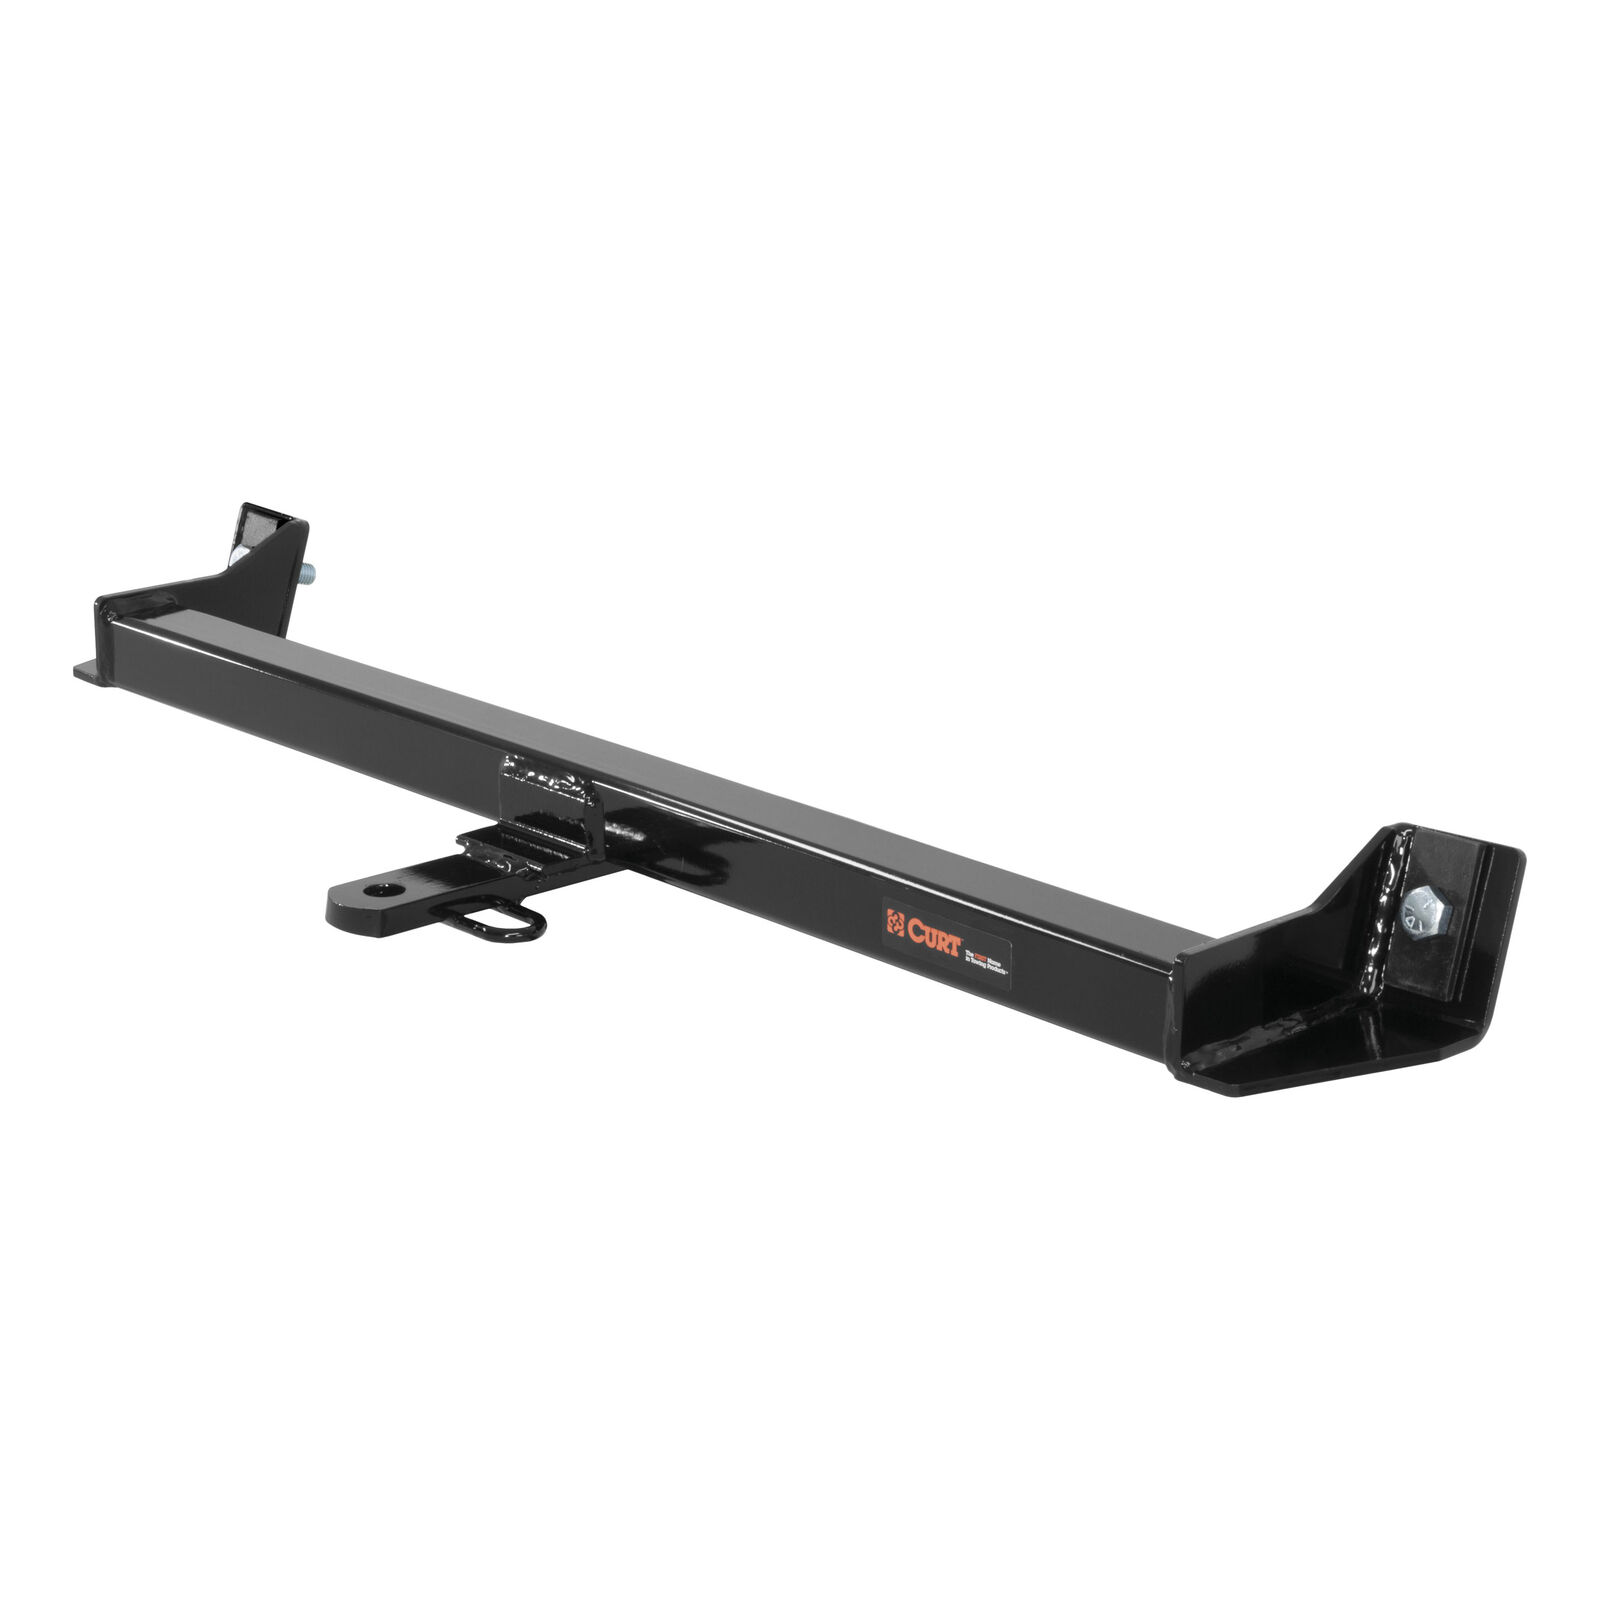 CURT 11611 Class 1 Fixed-Tongue Trailer Hitch with 3/4-Inch Trailer Ball Hole